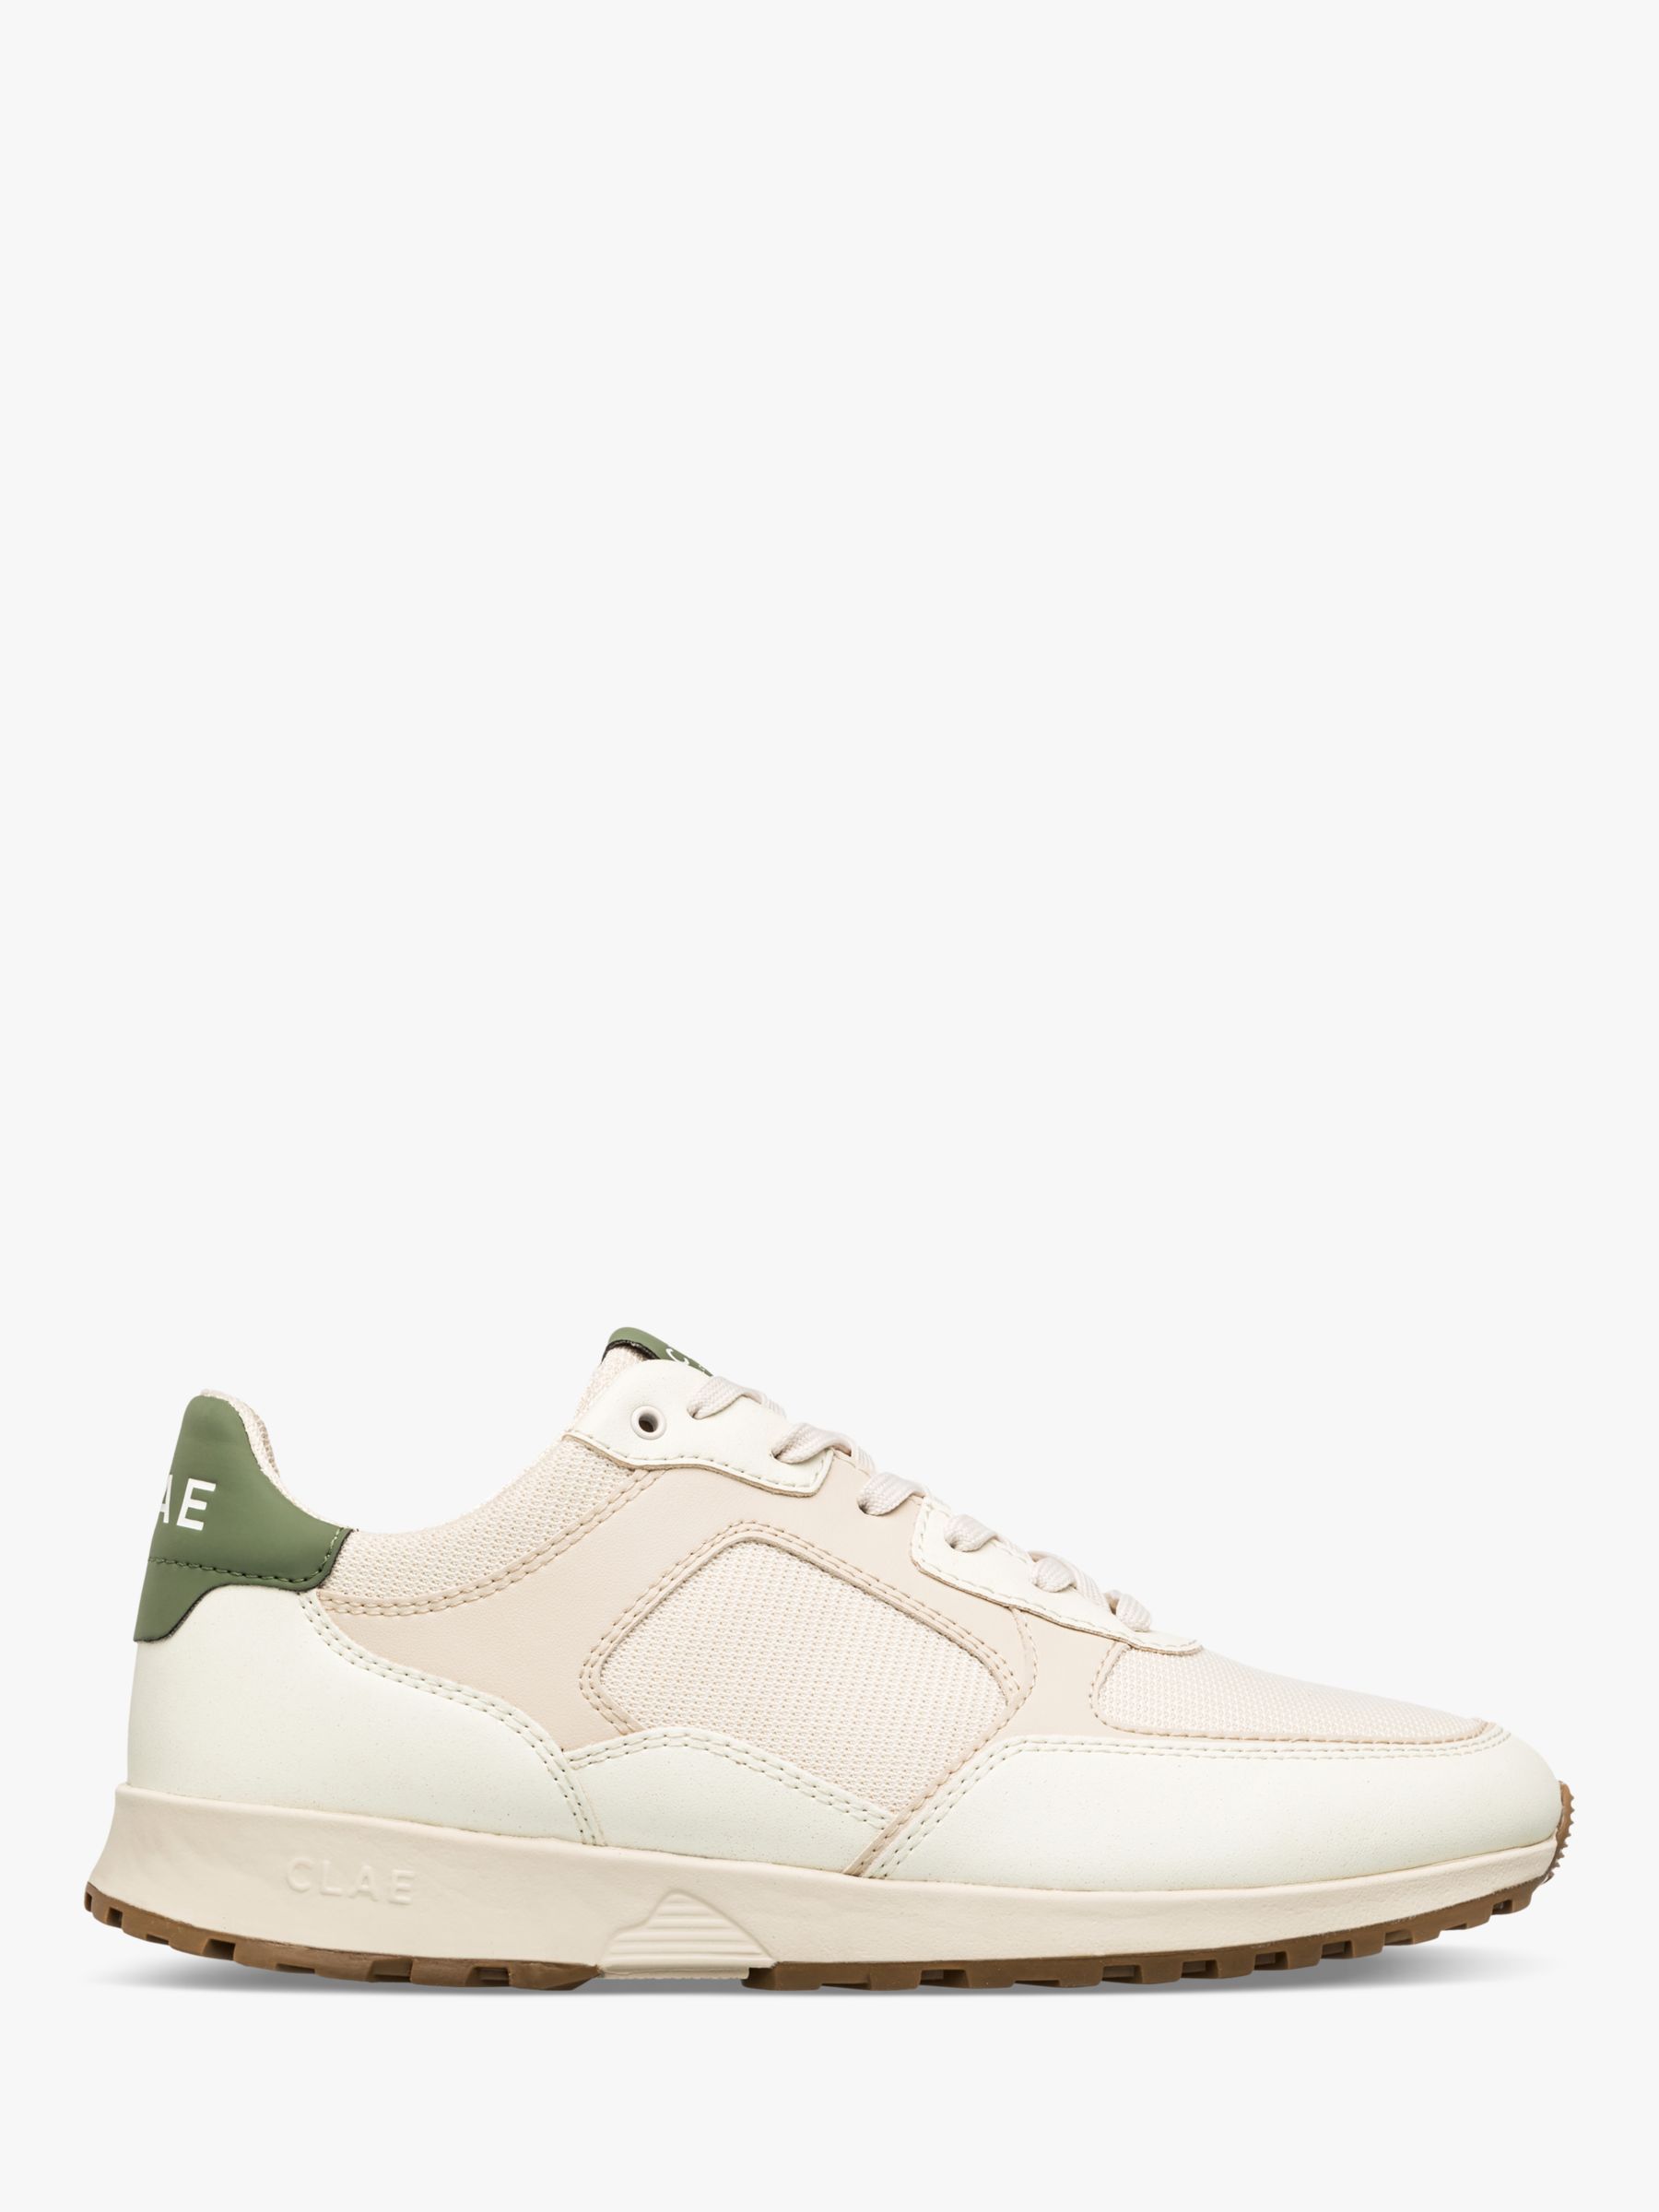 CLAE Joshua Lace Up Trainers, Off White/Almond, 3